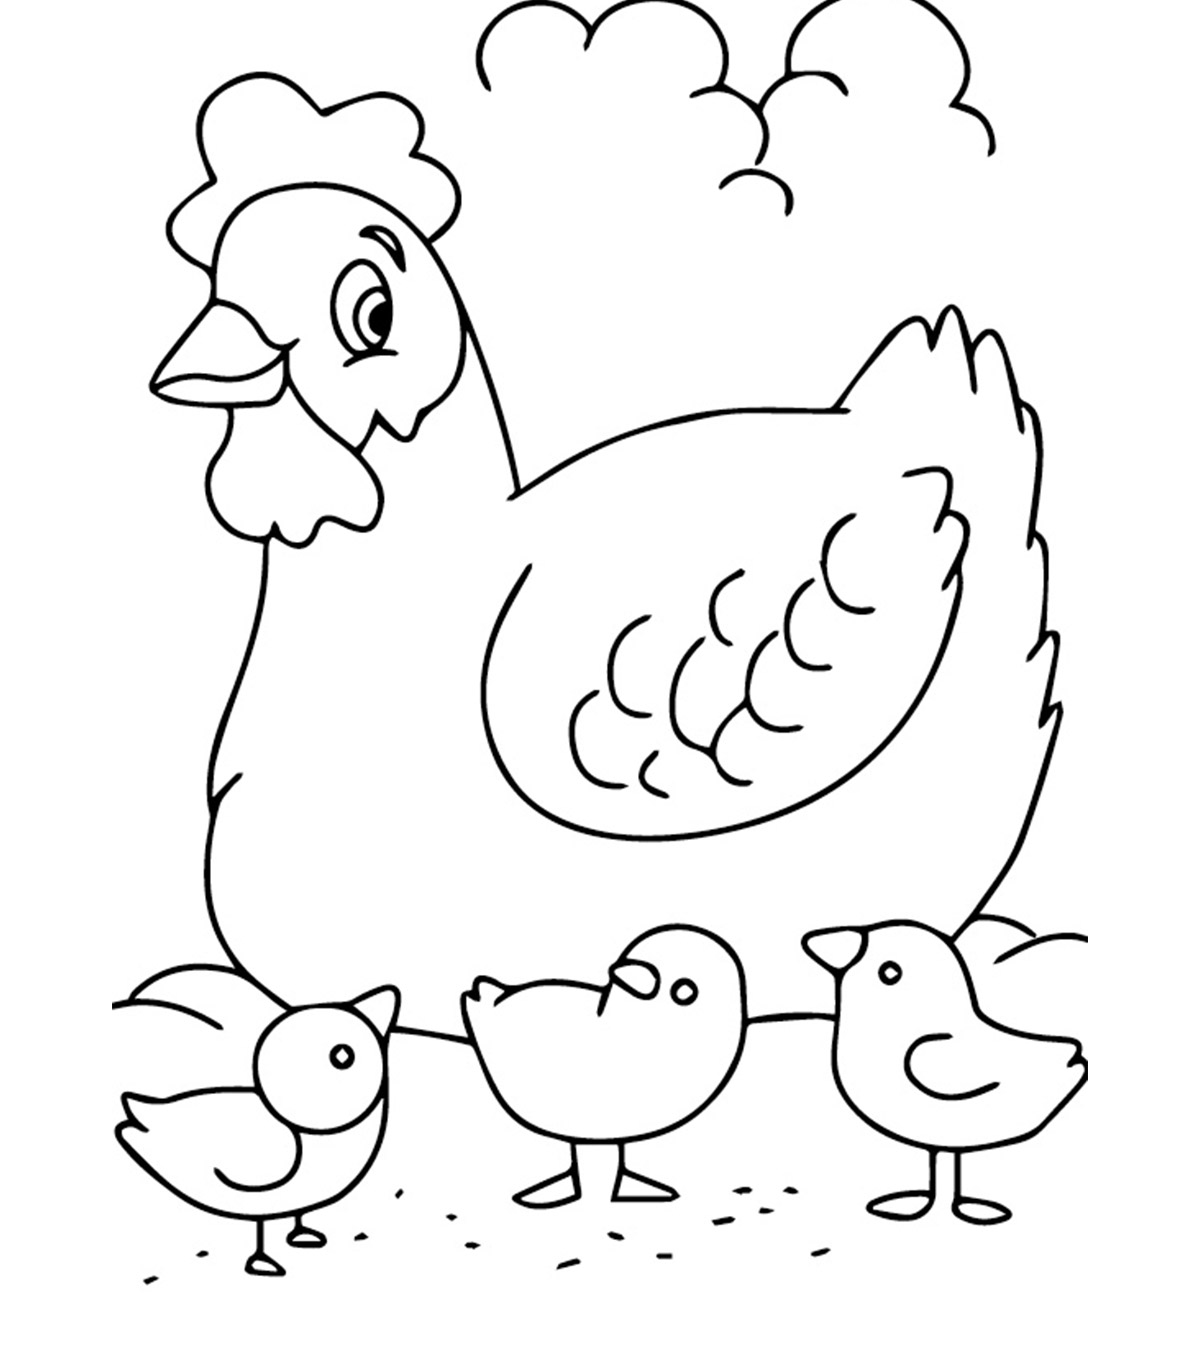 710 Farm Animals Coloring Pages Images Download Free Images